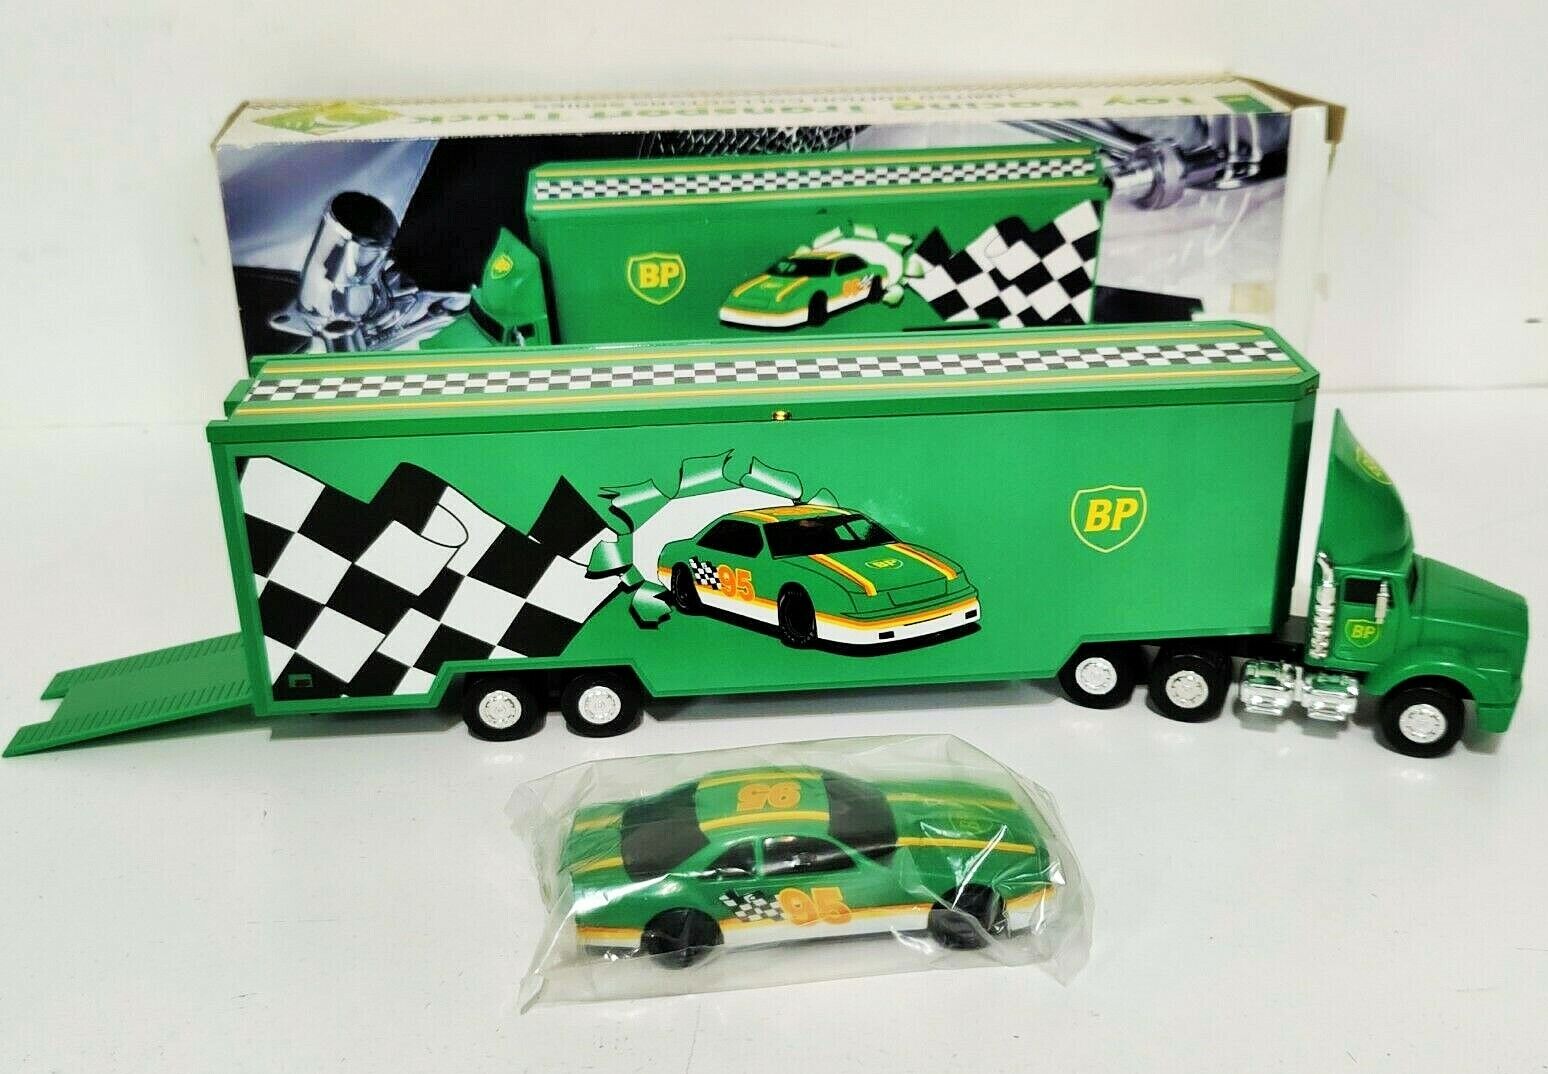 Bp Toy Racing Transport Truck Limited Edition Collectors Series With Car.....t65